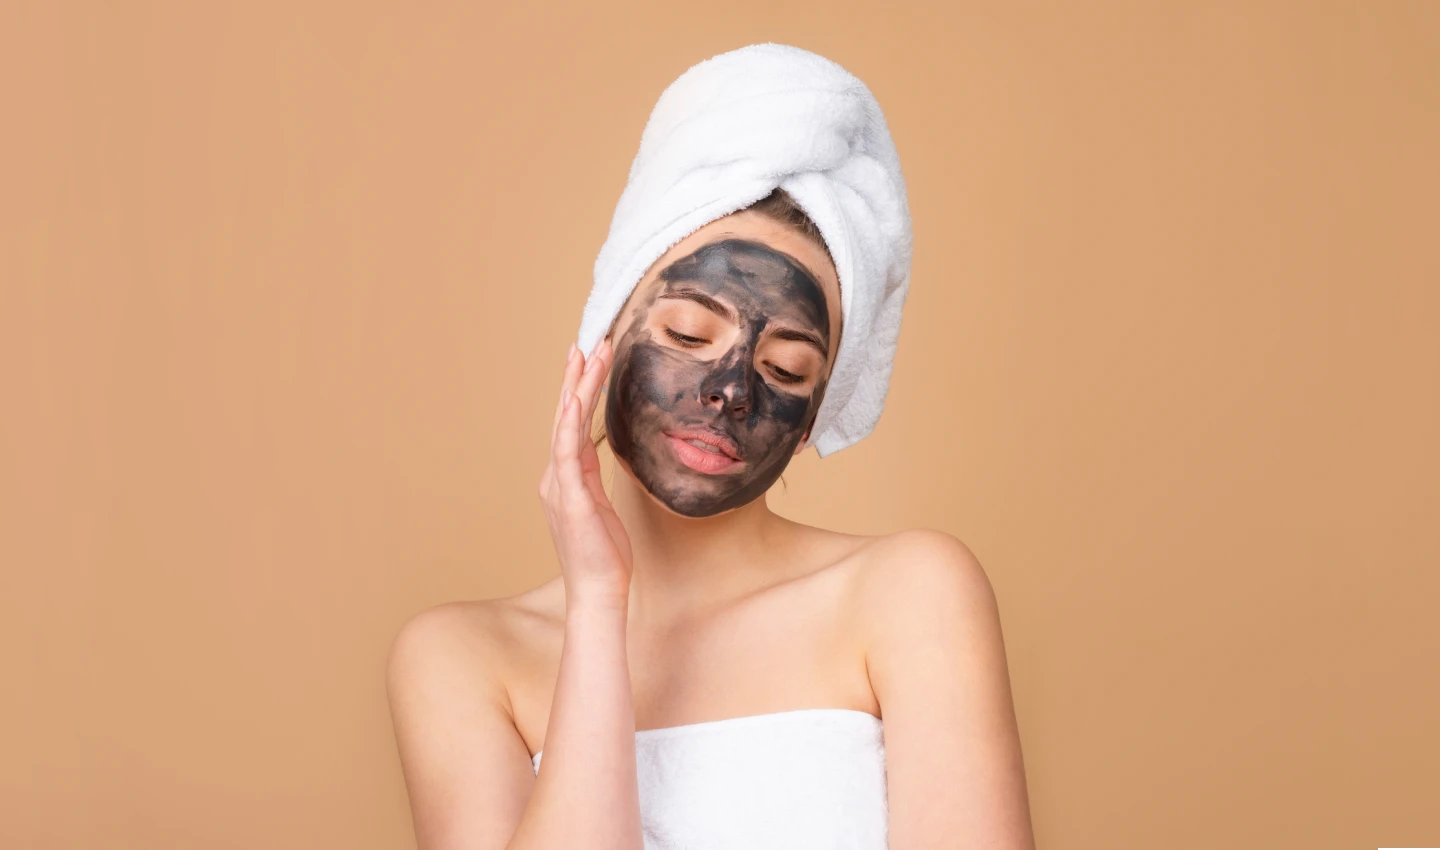 A young woman applies a charcoal mask to her face. Incorporating skincare masks benefits like this one into your beauty routine can help improve your skin's appearance and health.